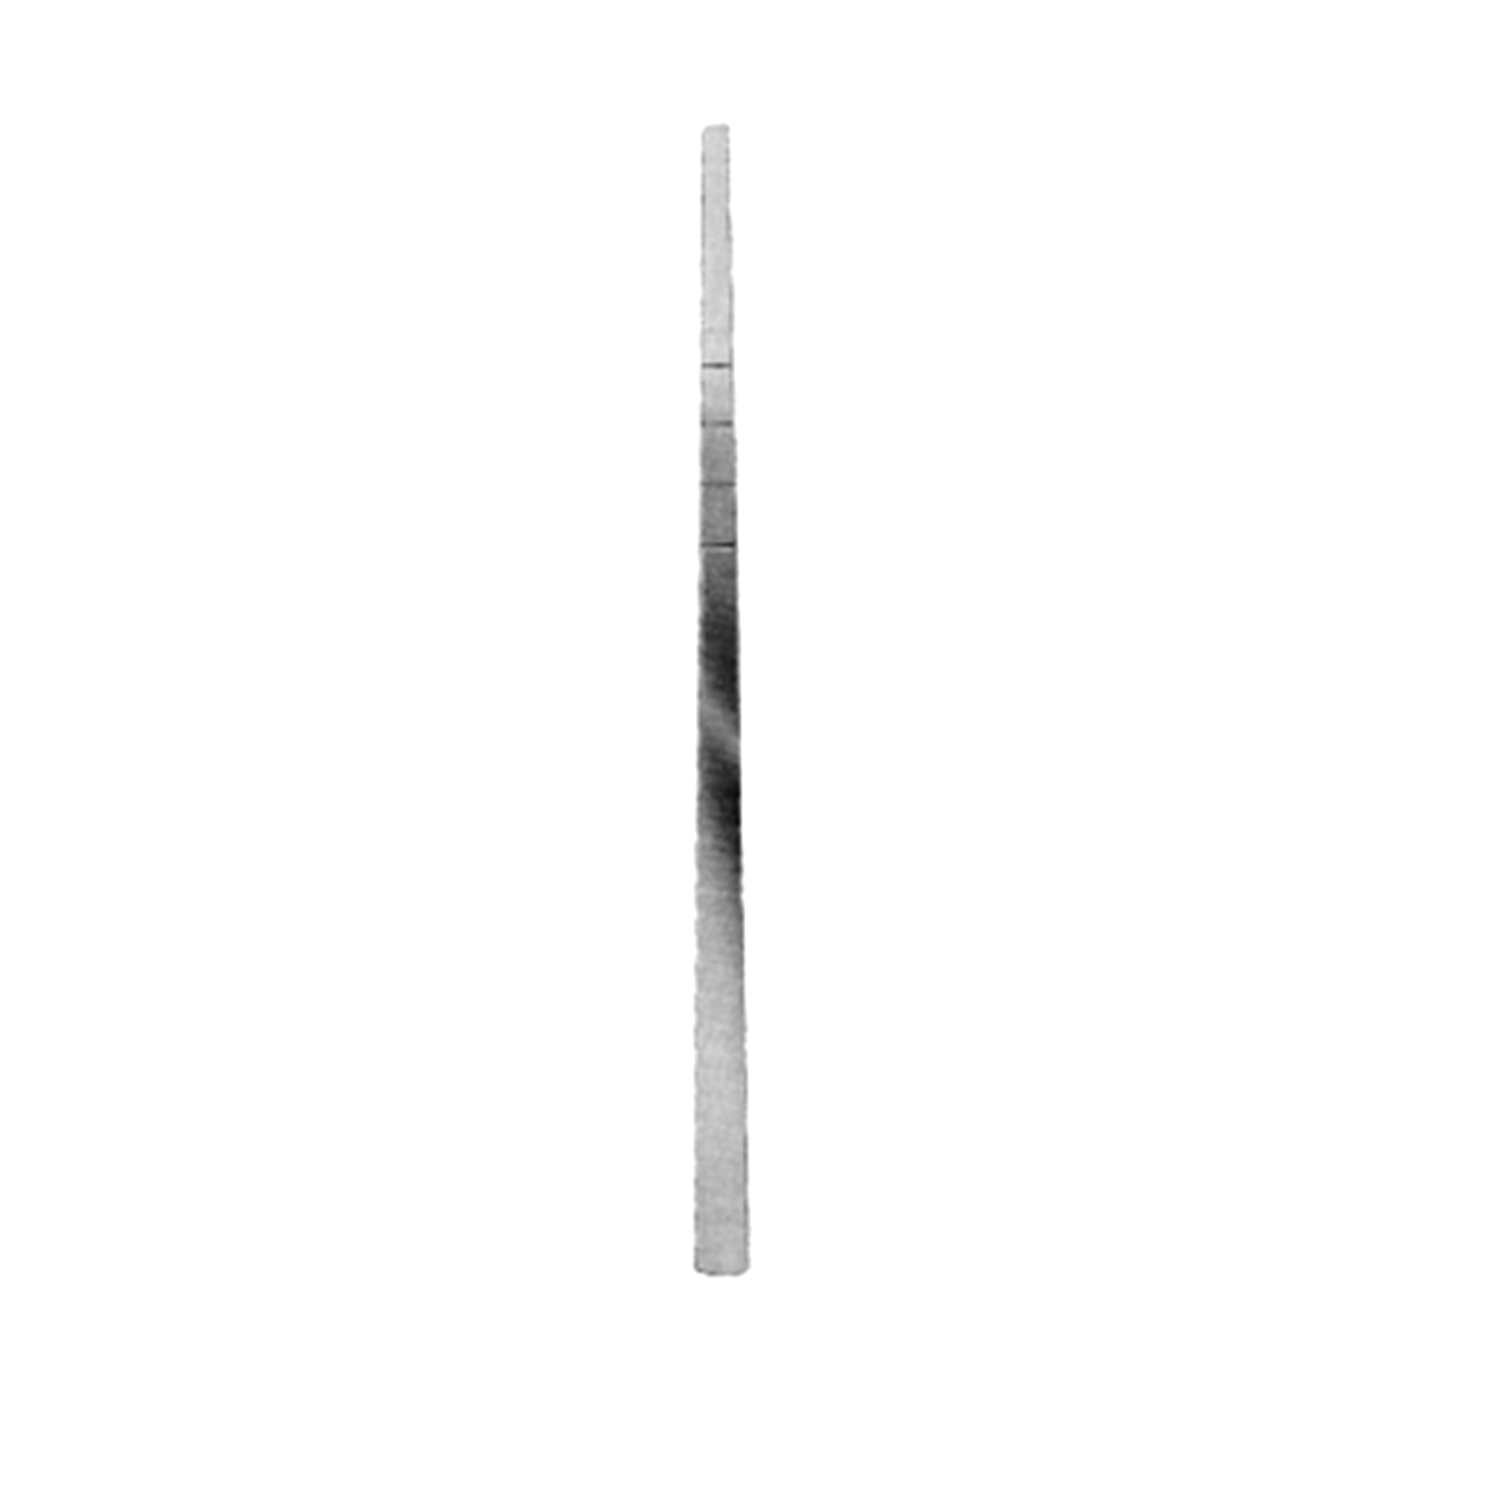 Marina Medical Cottle Chisel - Straight, 6mm: 18cm/7in